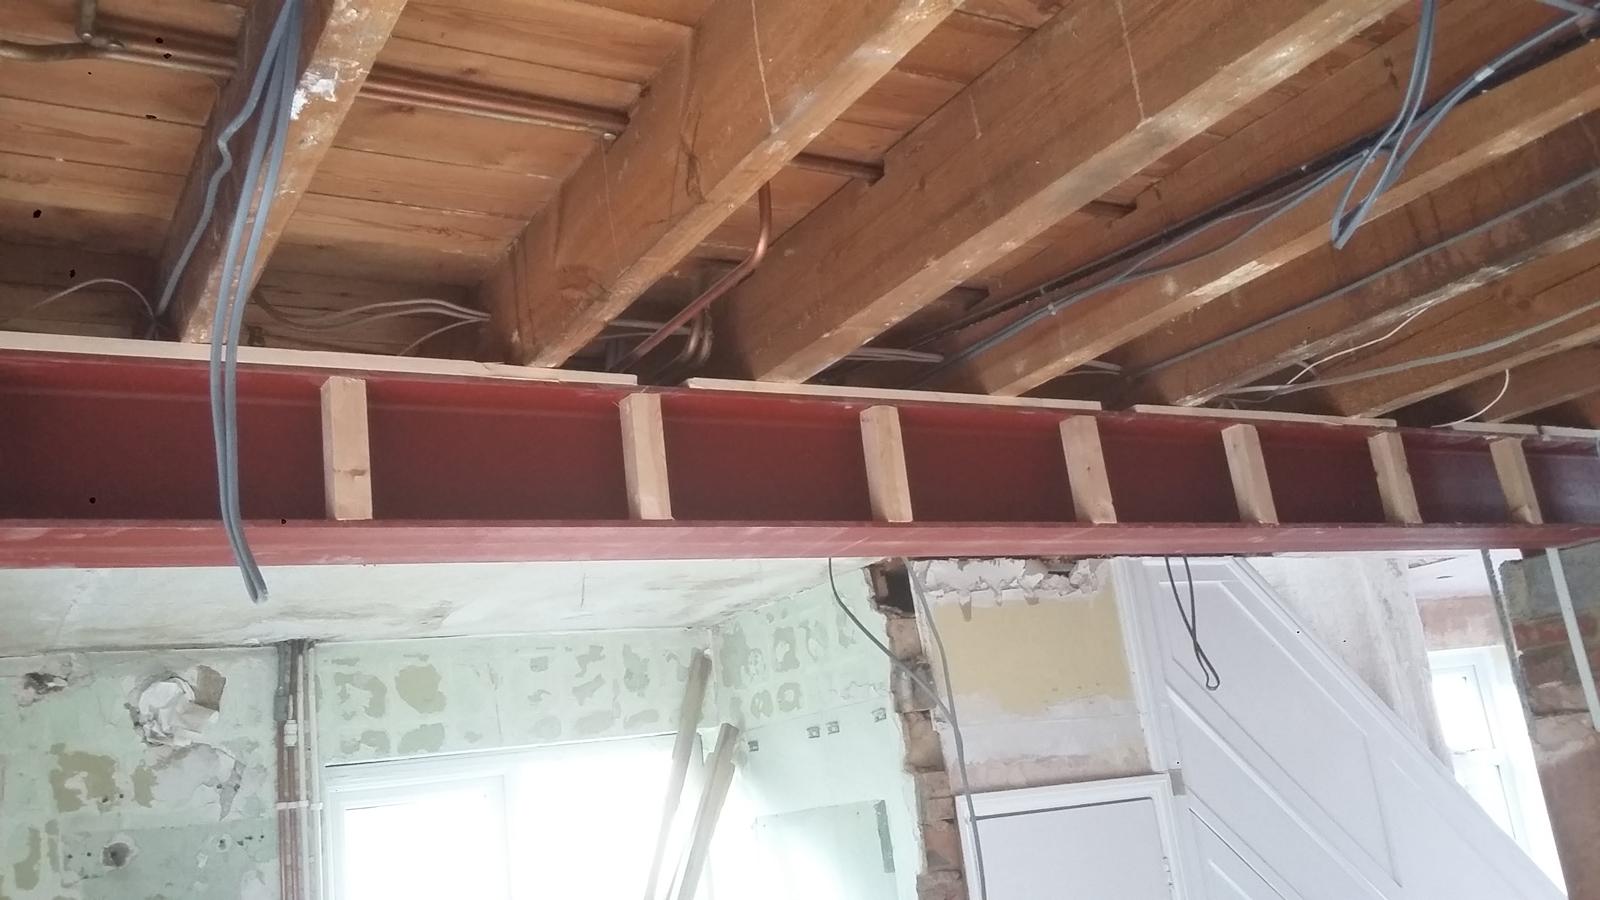 Steel support and exposed joists